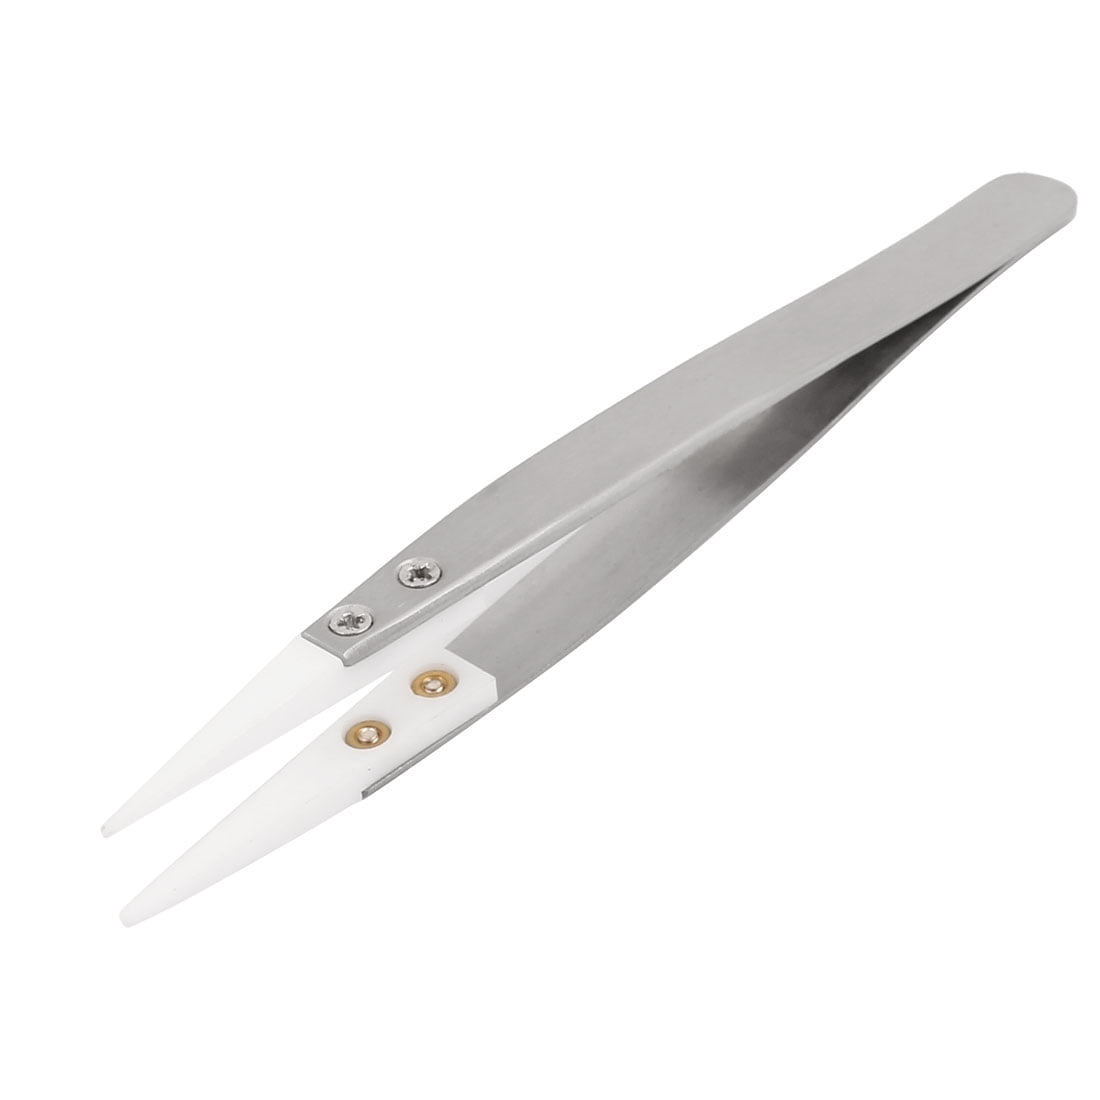 Fine tip stainless steel ceramic tipped,high temperature resistant tweezers 